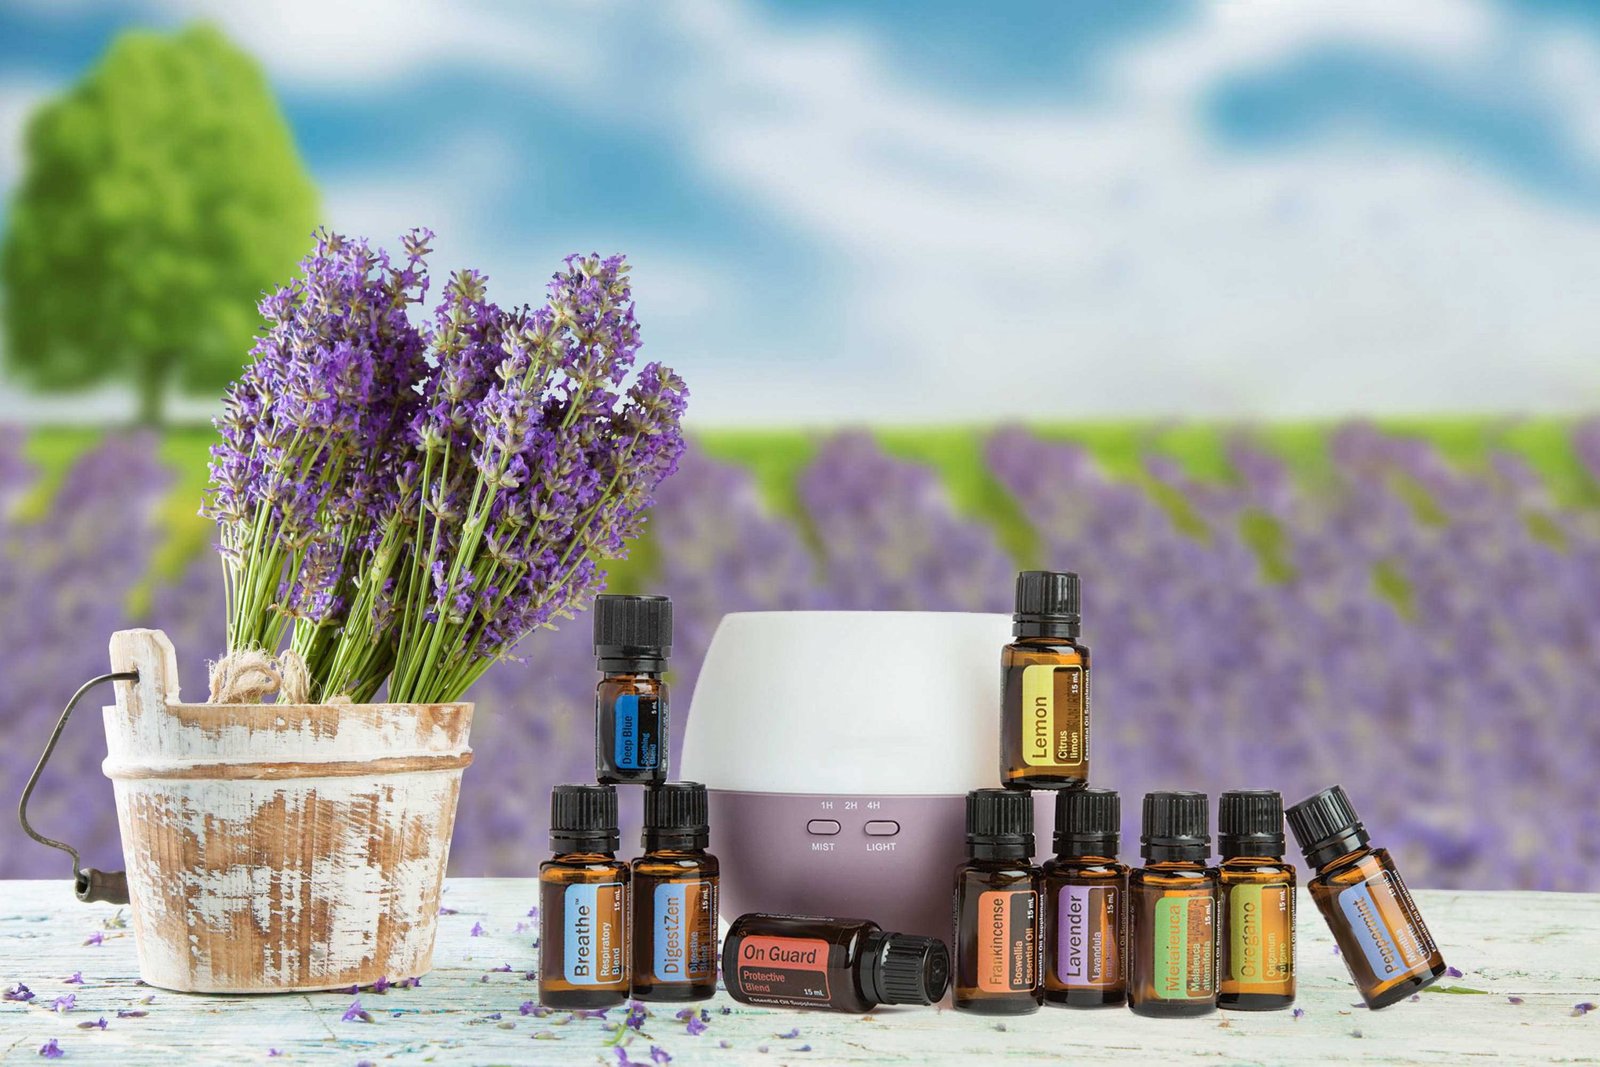 Diffuser with essential oils